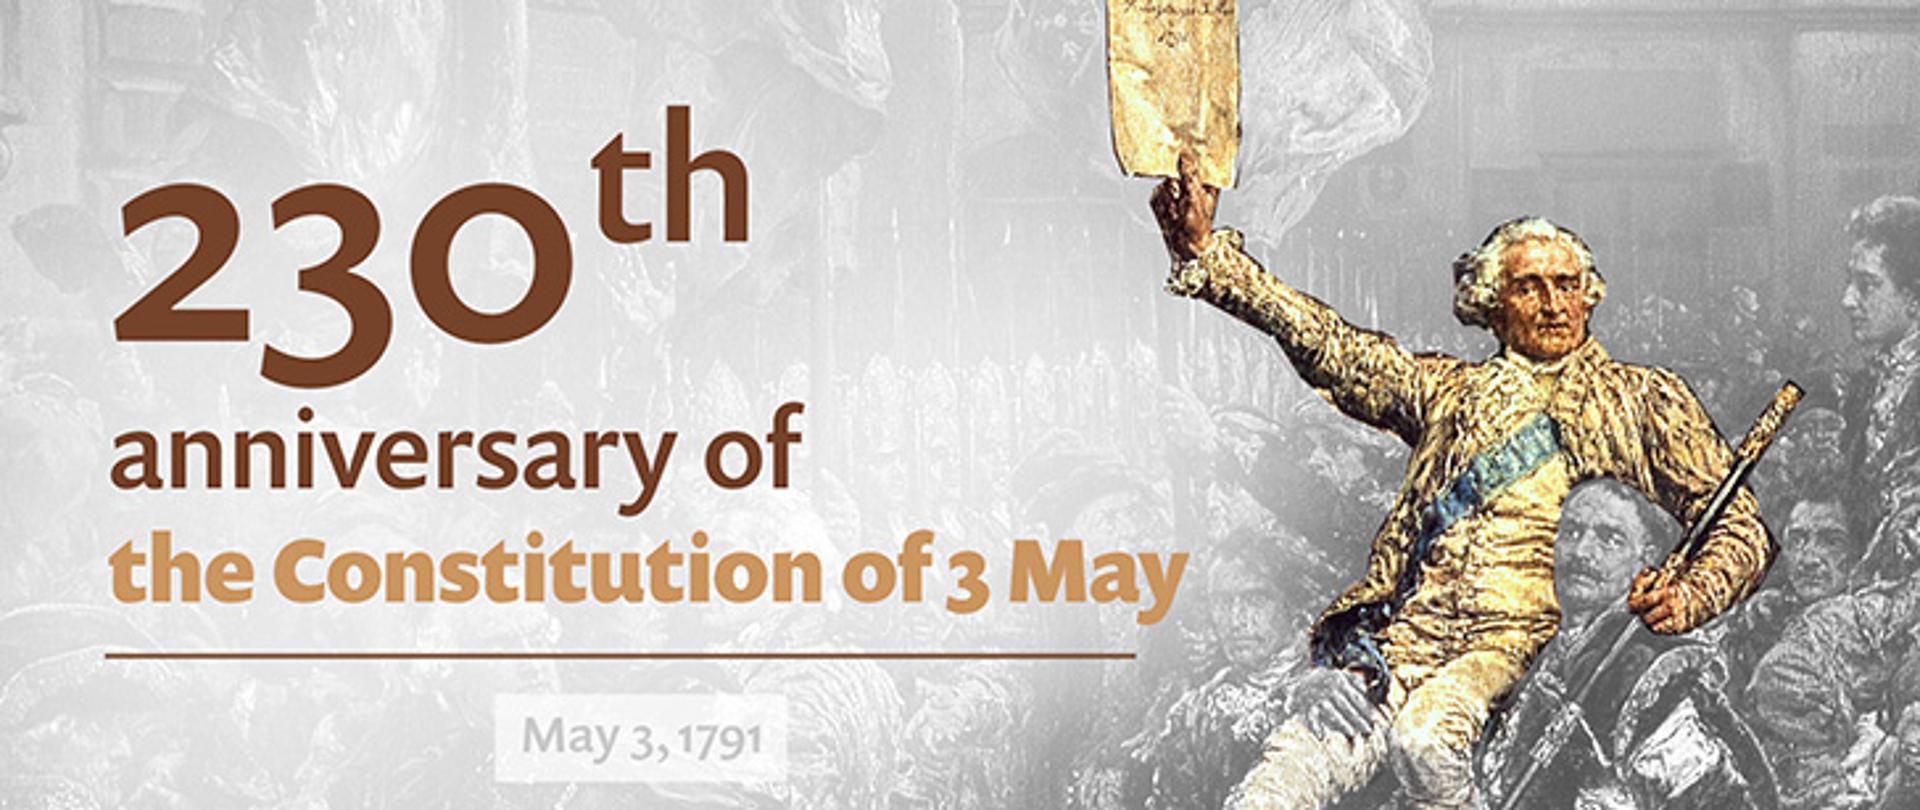 Anniversary of the Constitution of 3 May